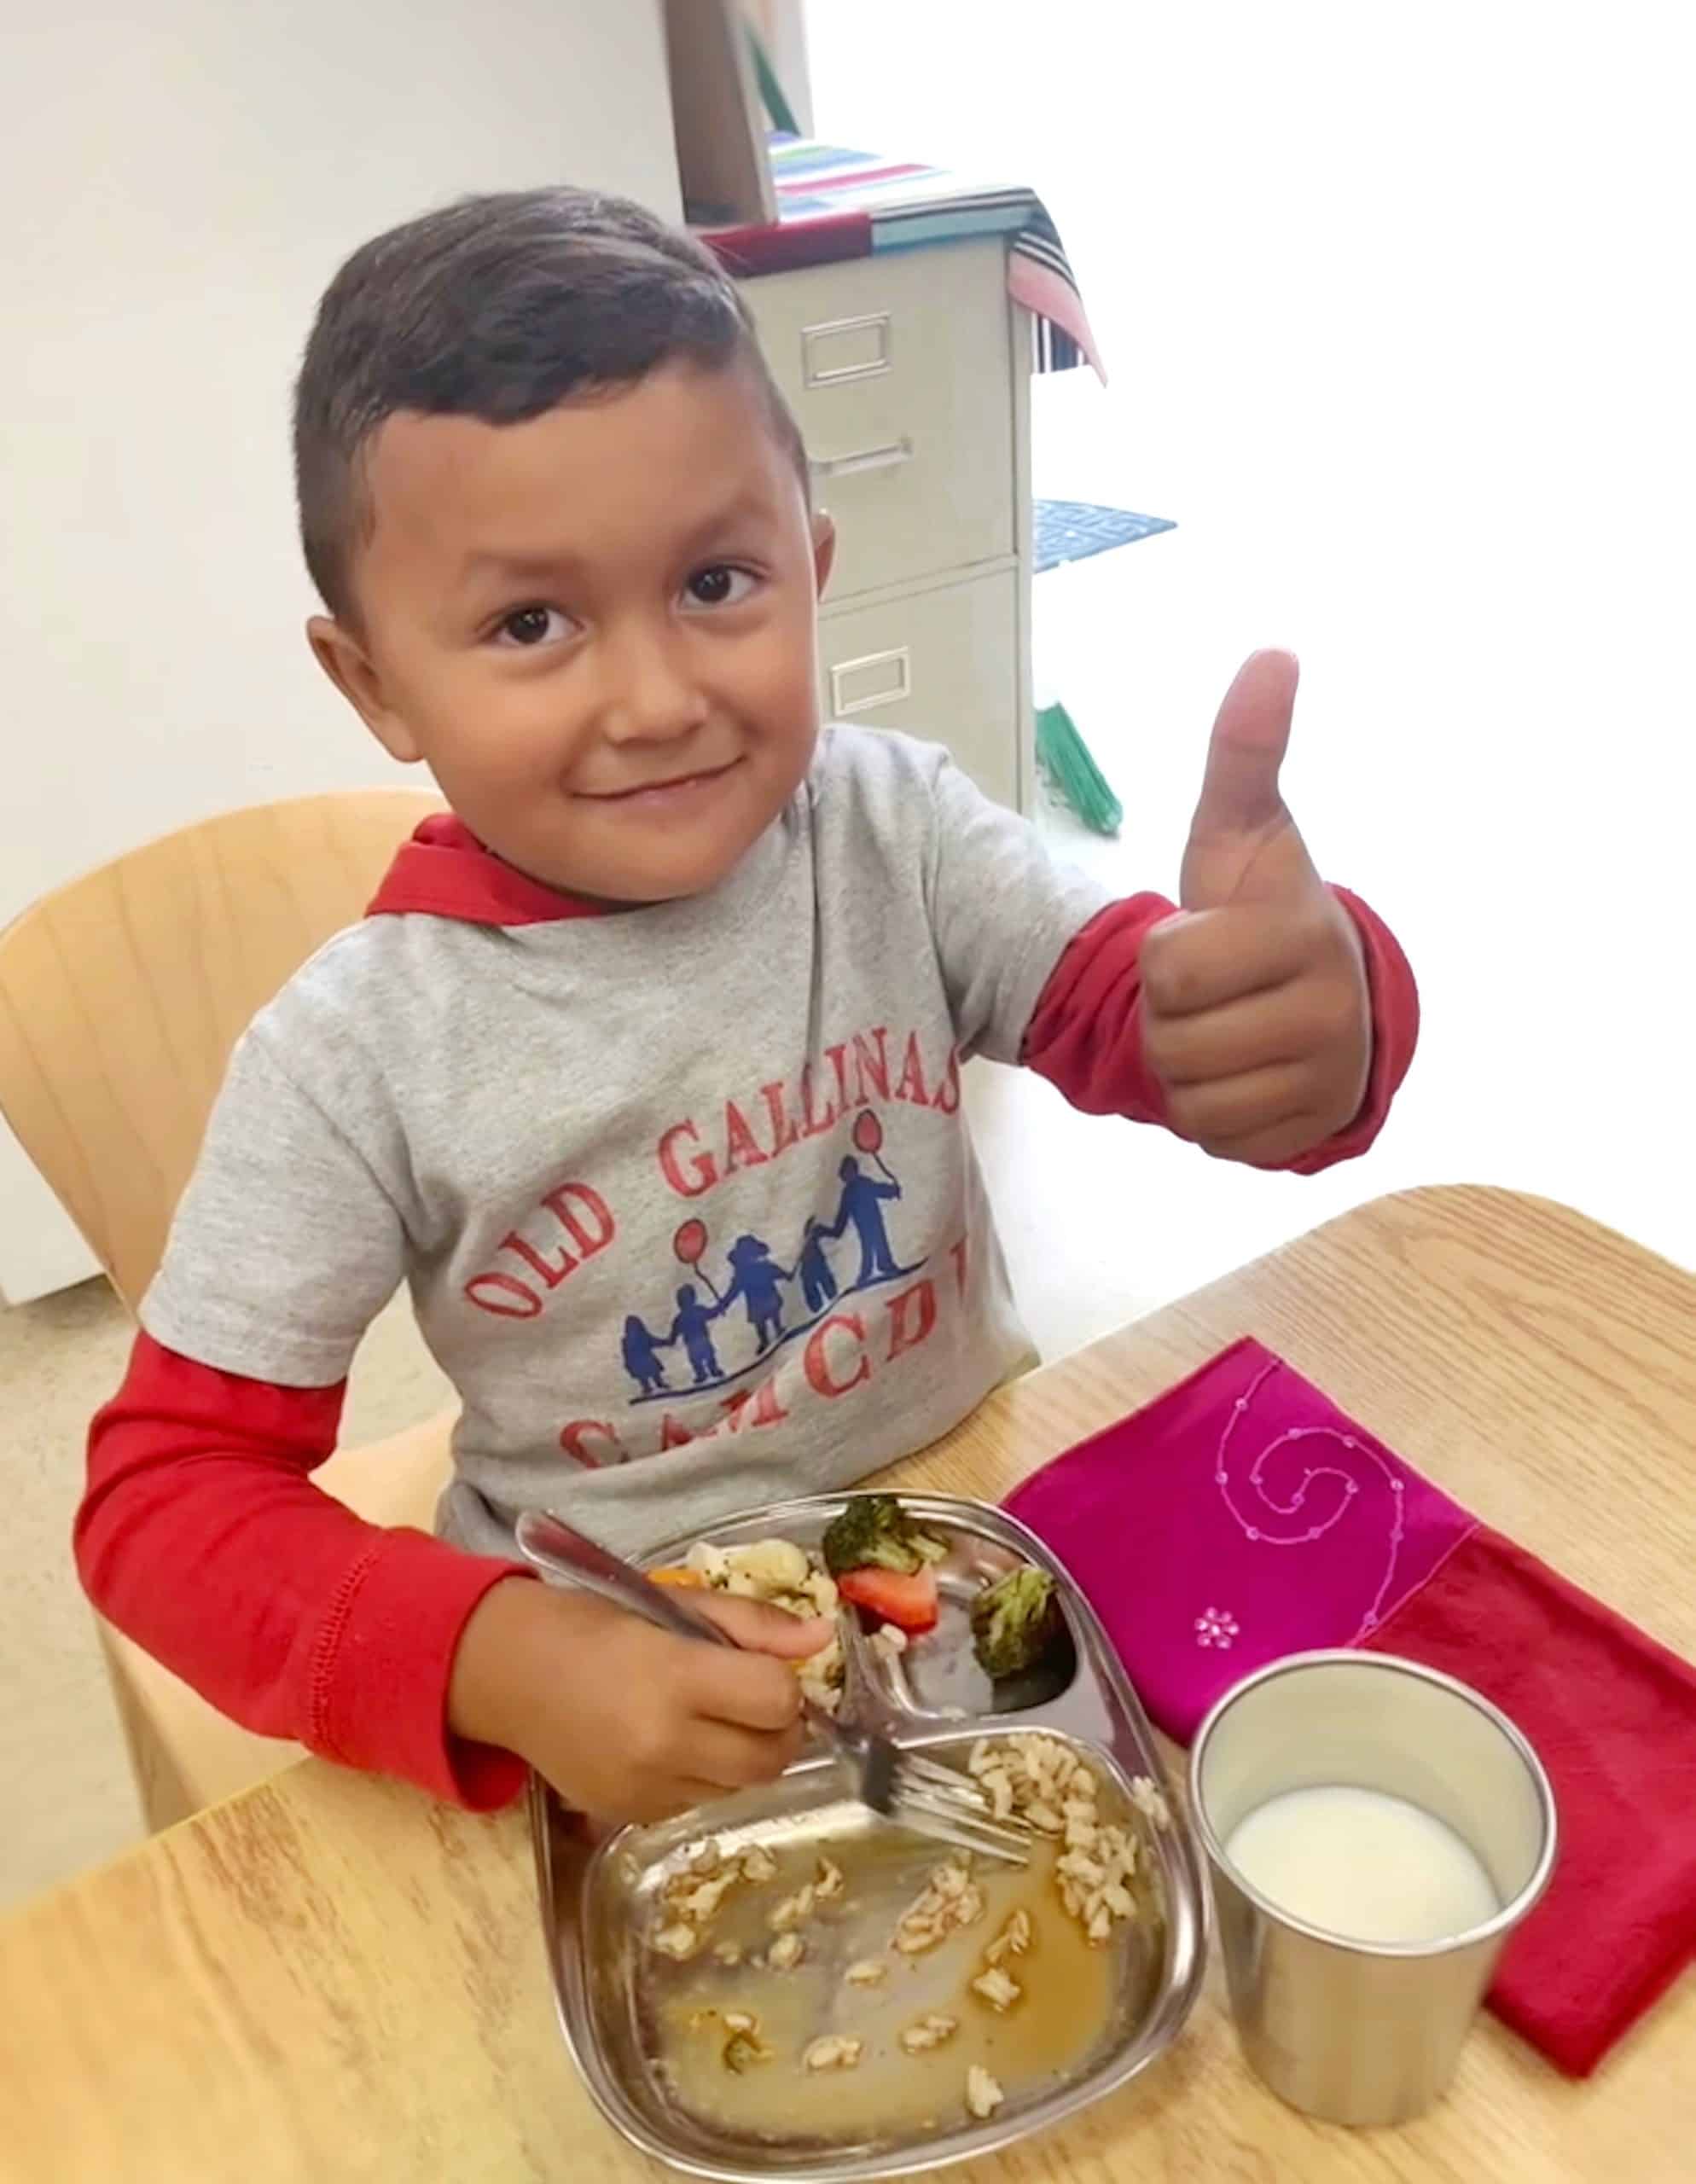 A student gives a thumbs up while eating an organic lunch with organic milk provided by Conscious Kitchen.